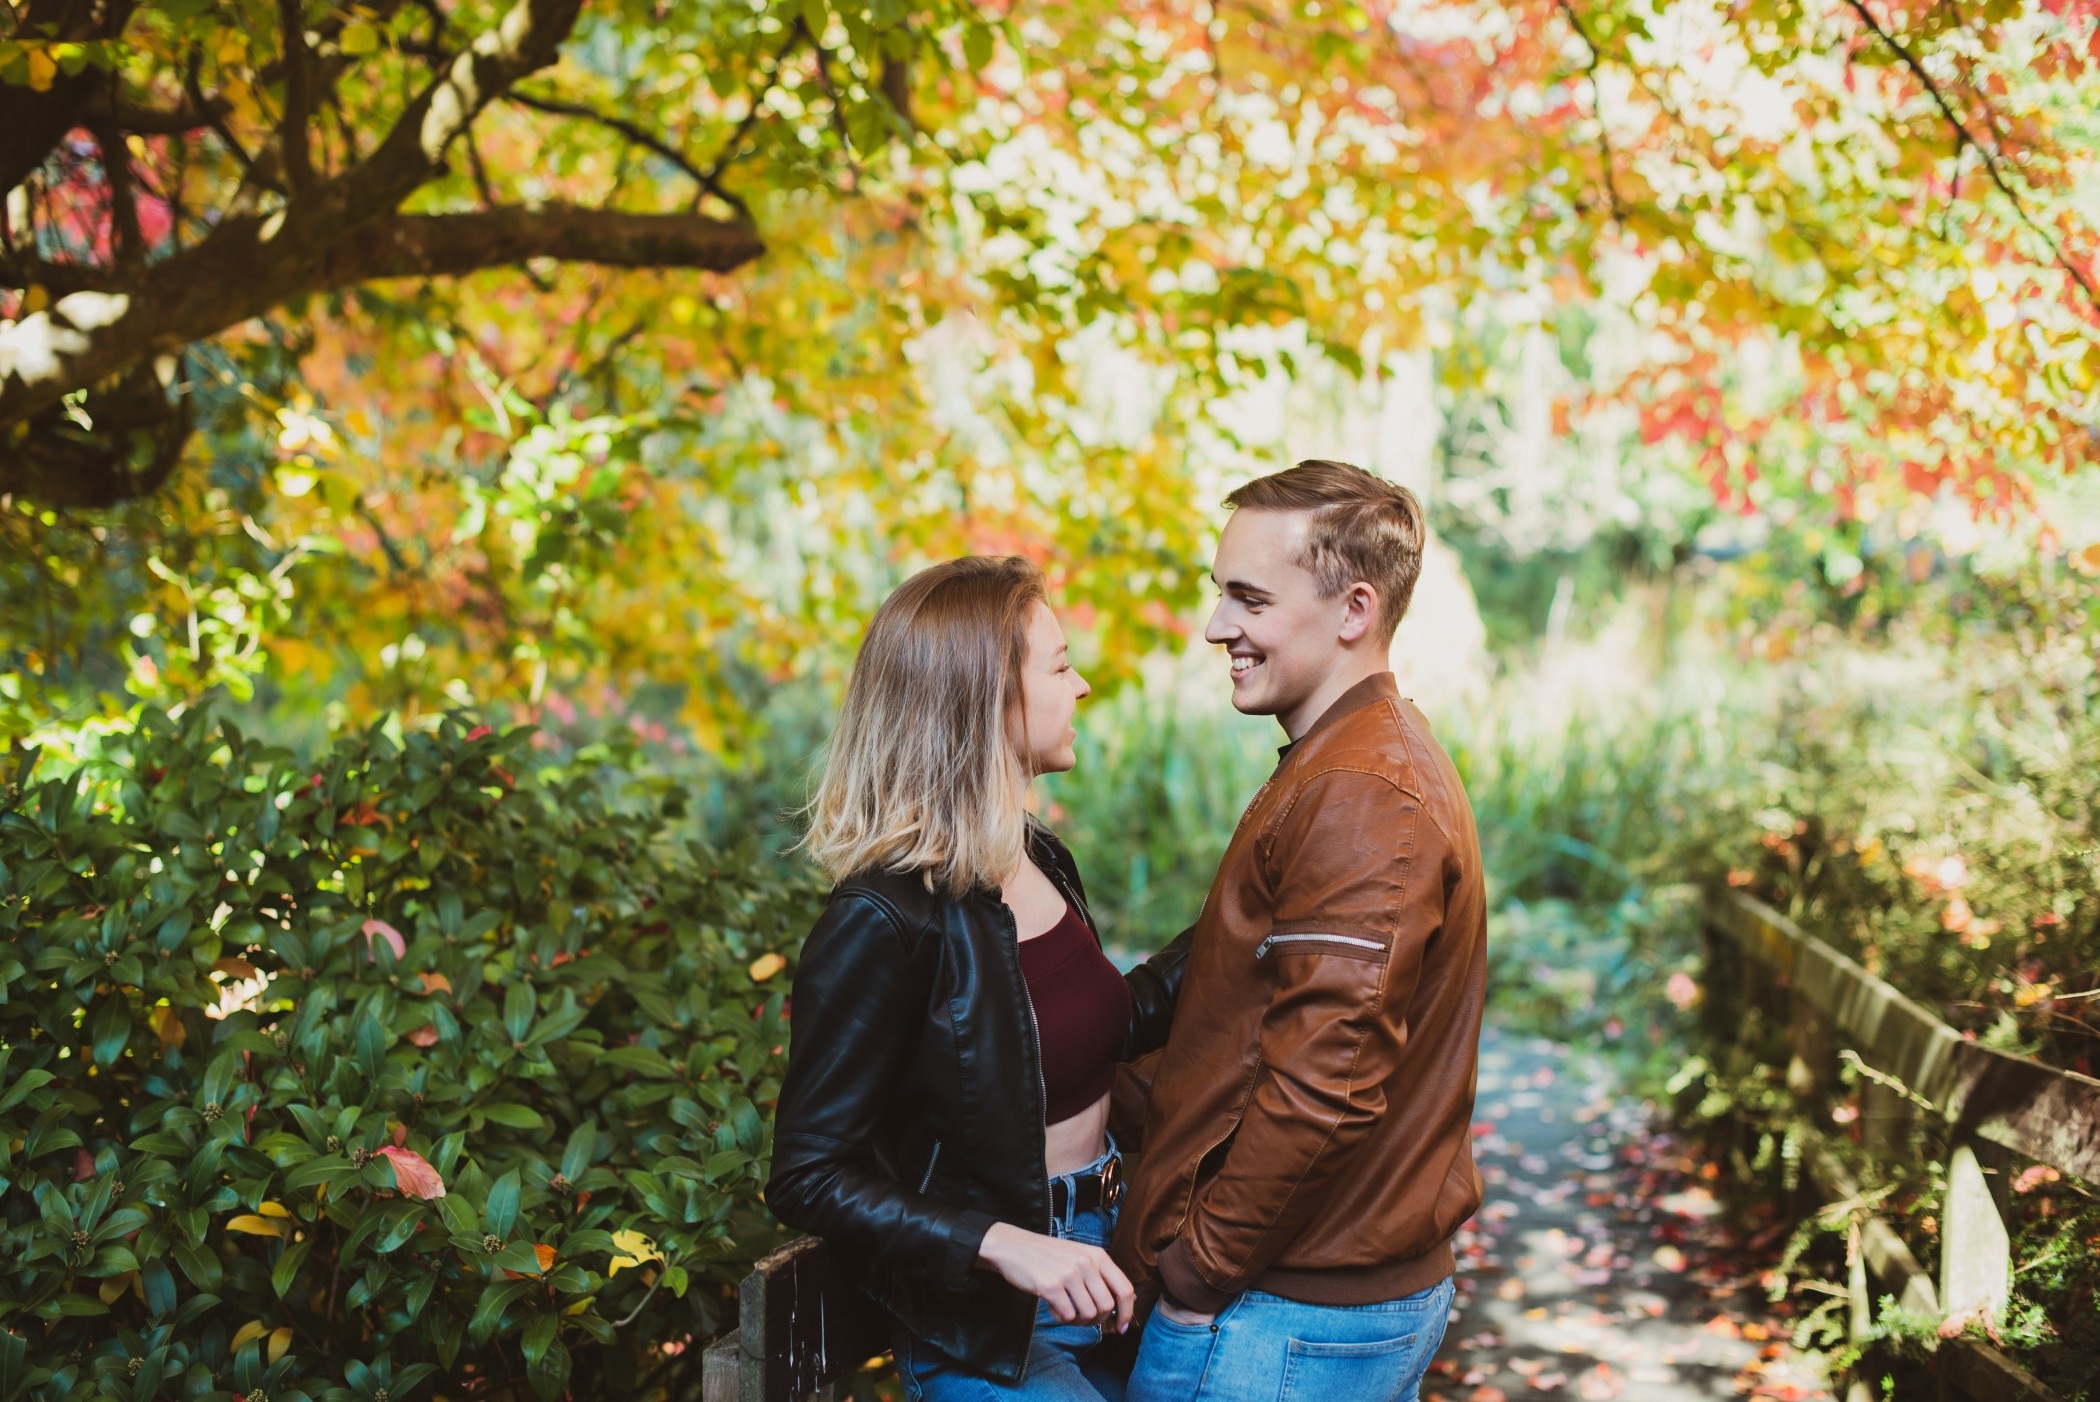 Dating During COVID: What’s Changed And What’s Stayed The Same